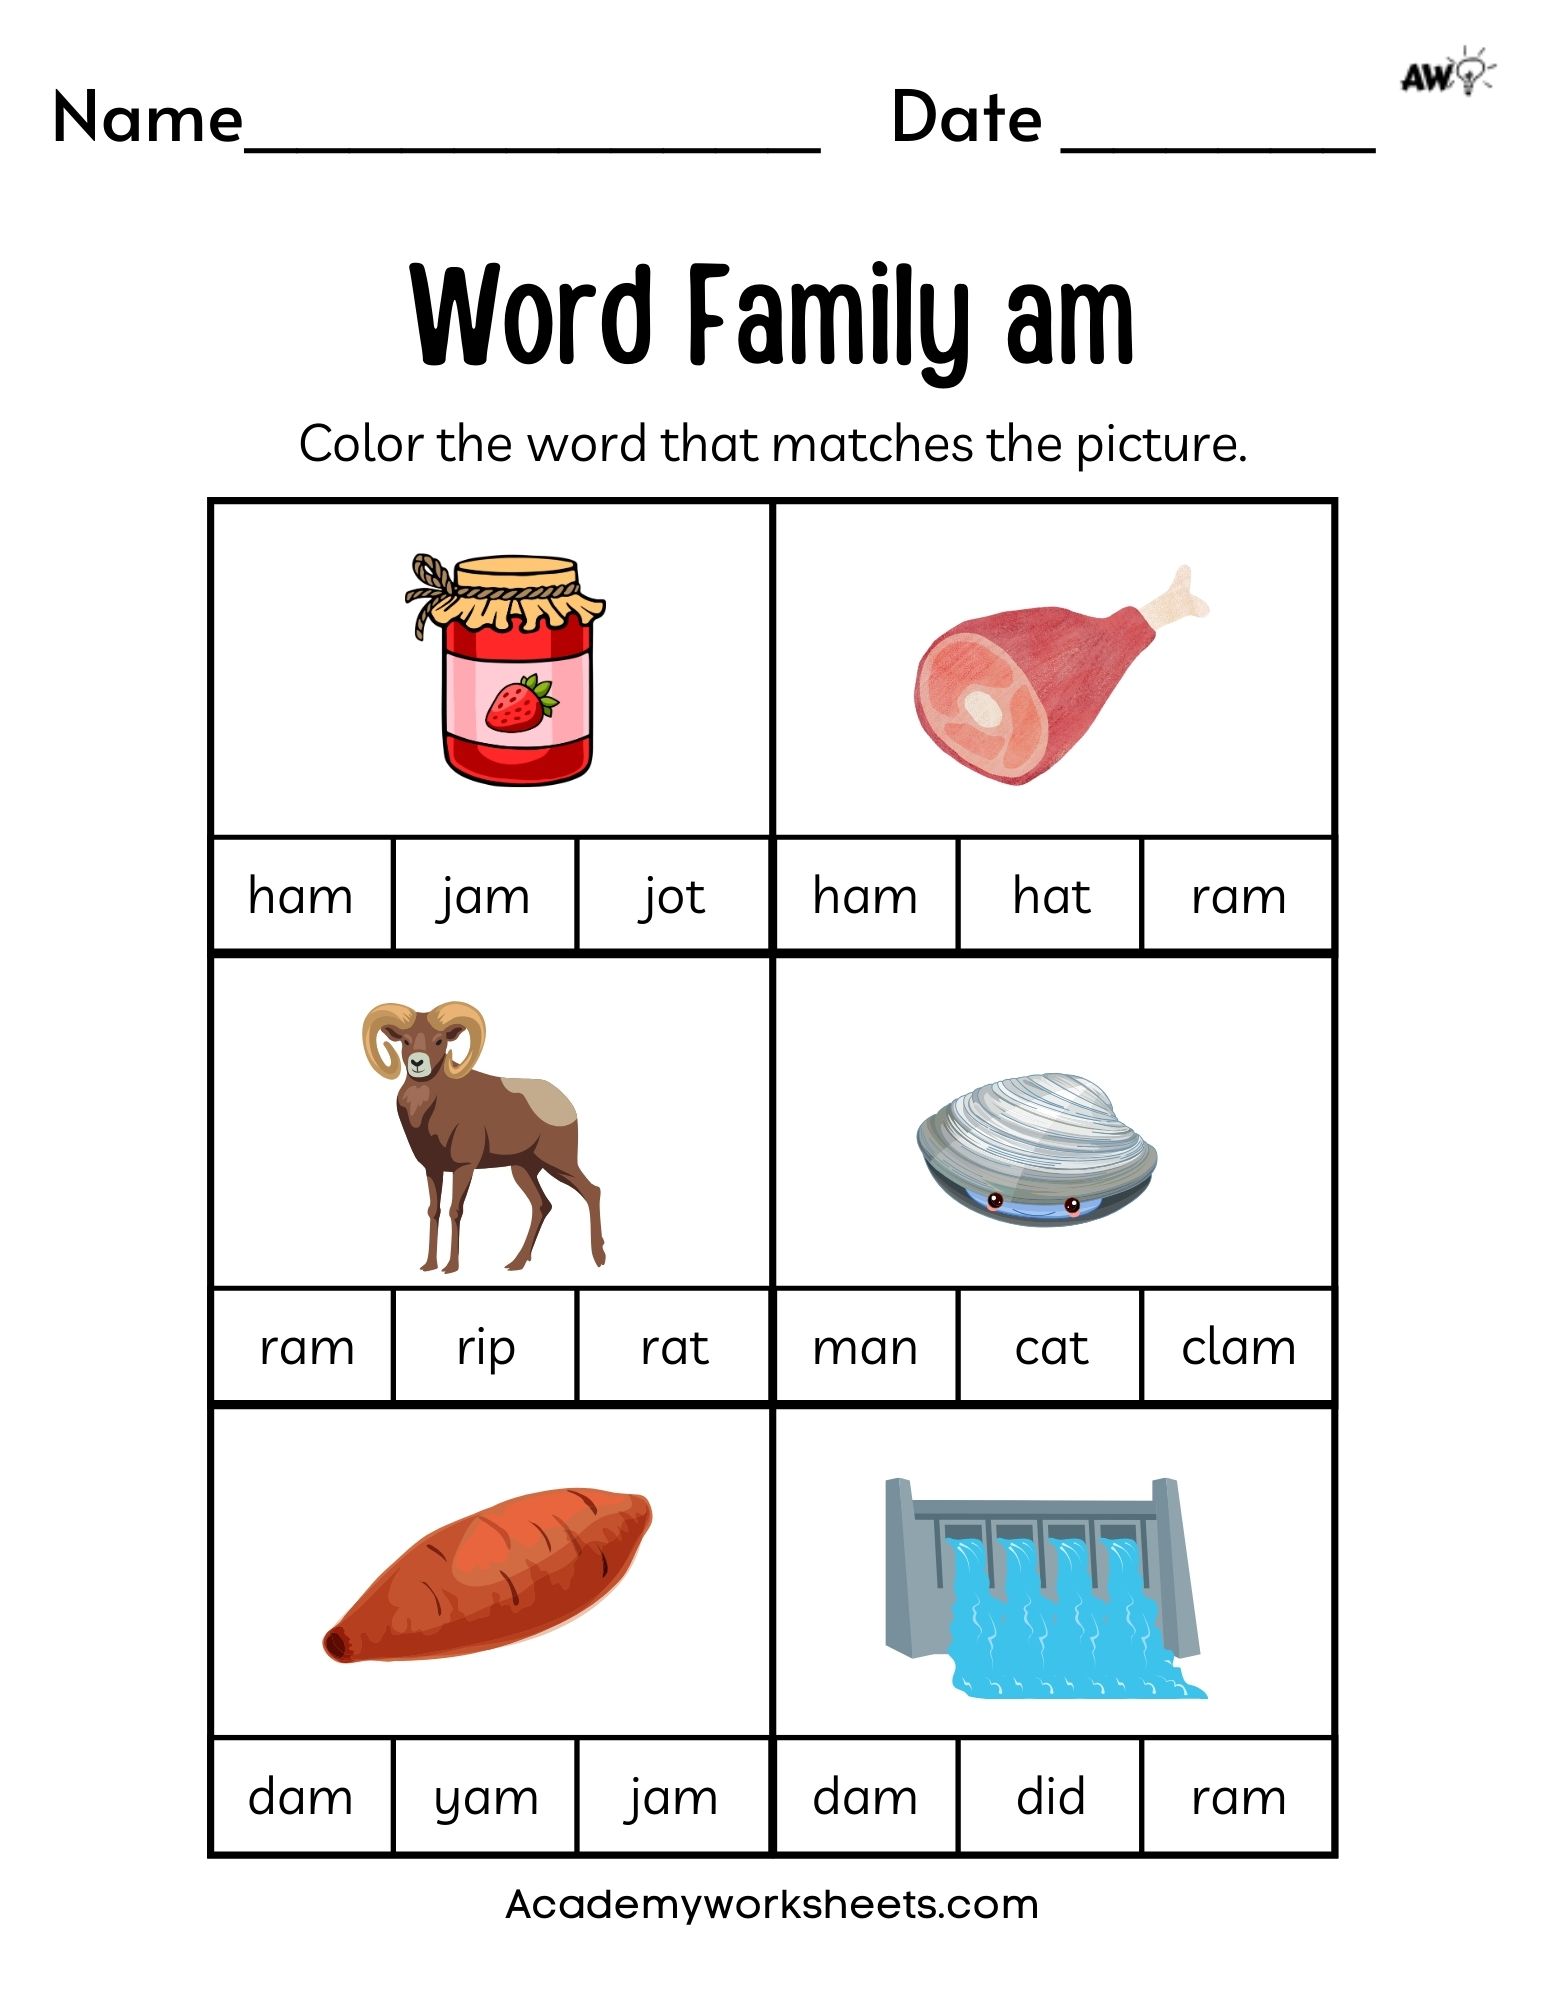 Free word family worksheets